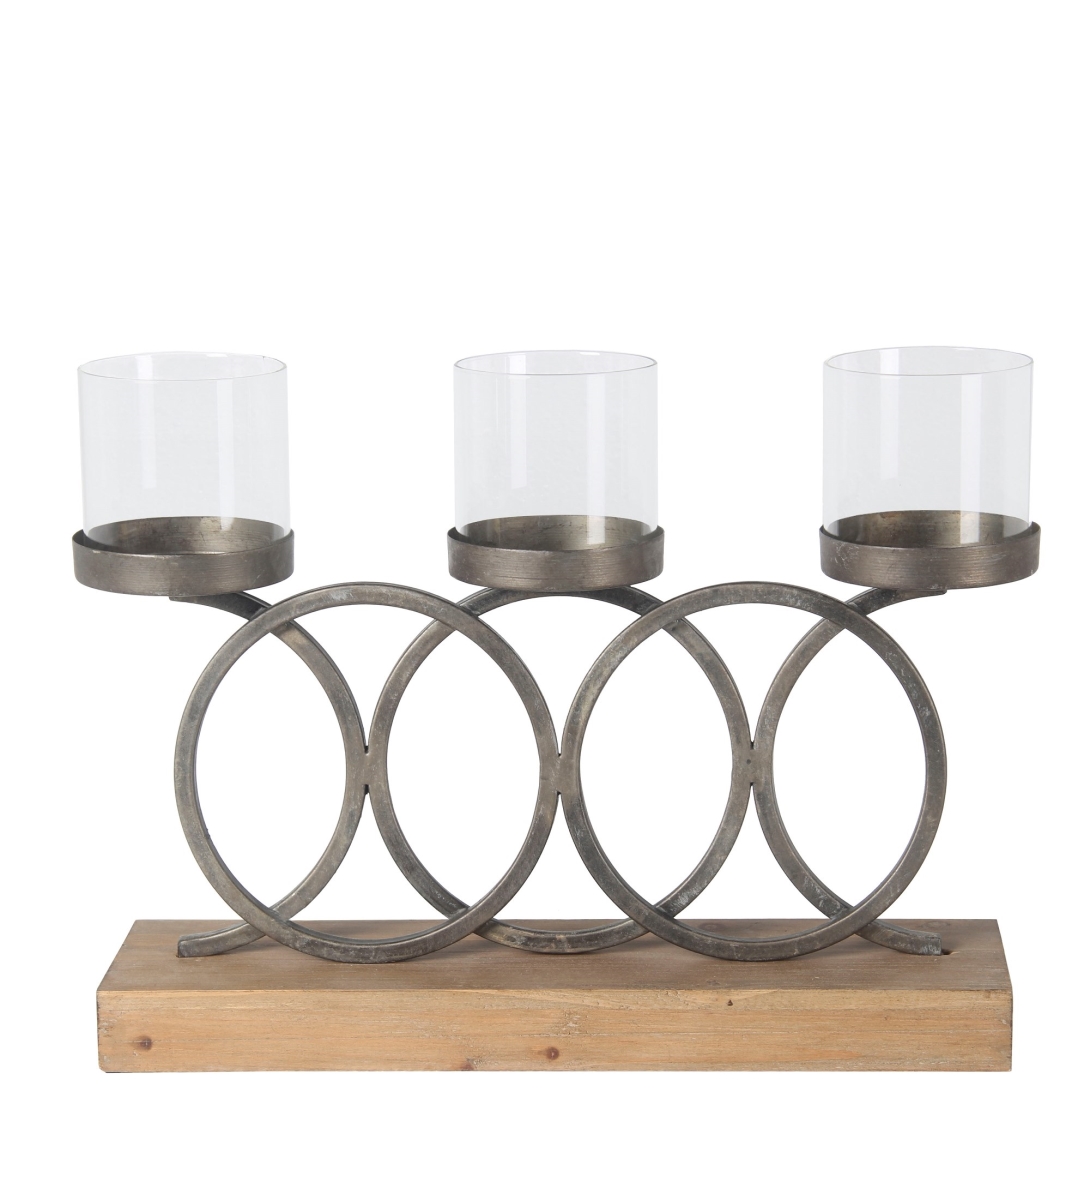 UPC 805572888687 product image for Privilege 88868 18.5 x 4.5 x 13.5 in. 3 Tier Candle Holder | upcitemdb.com